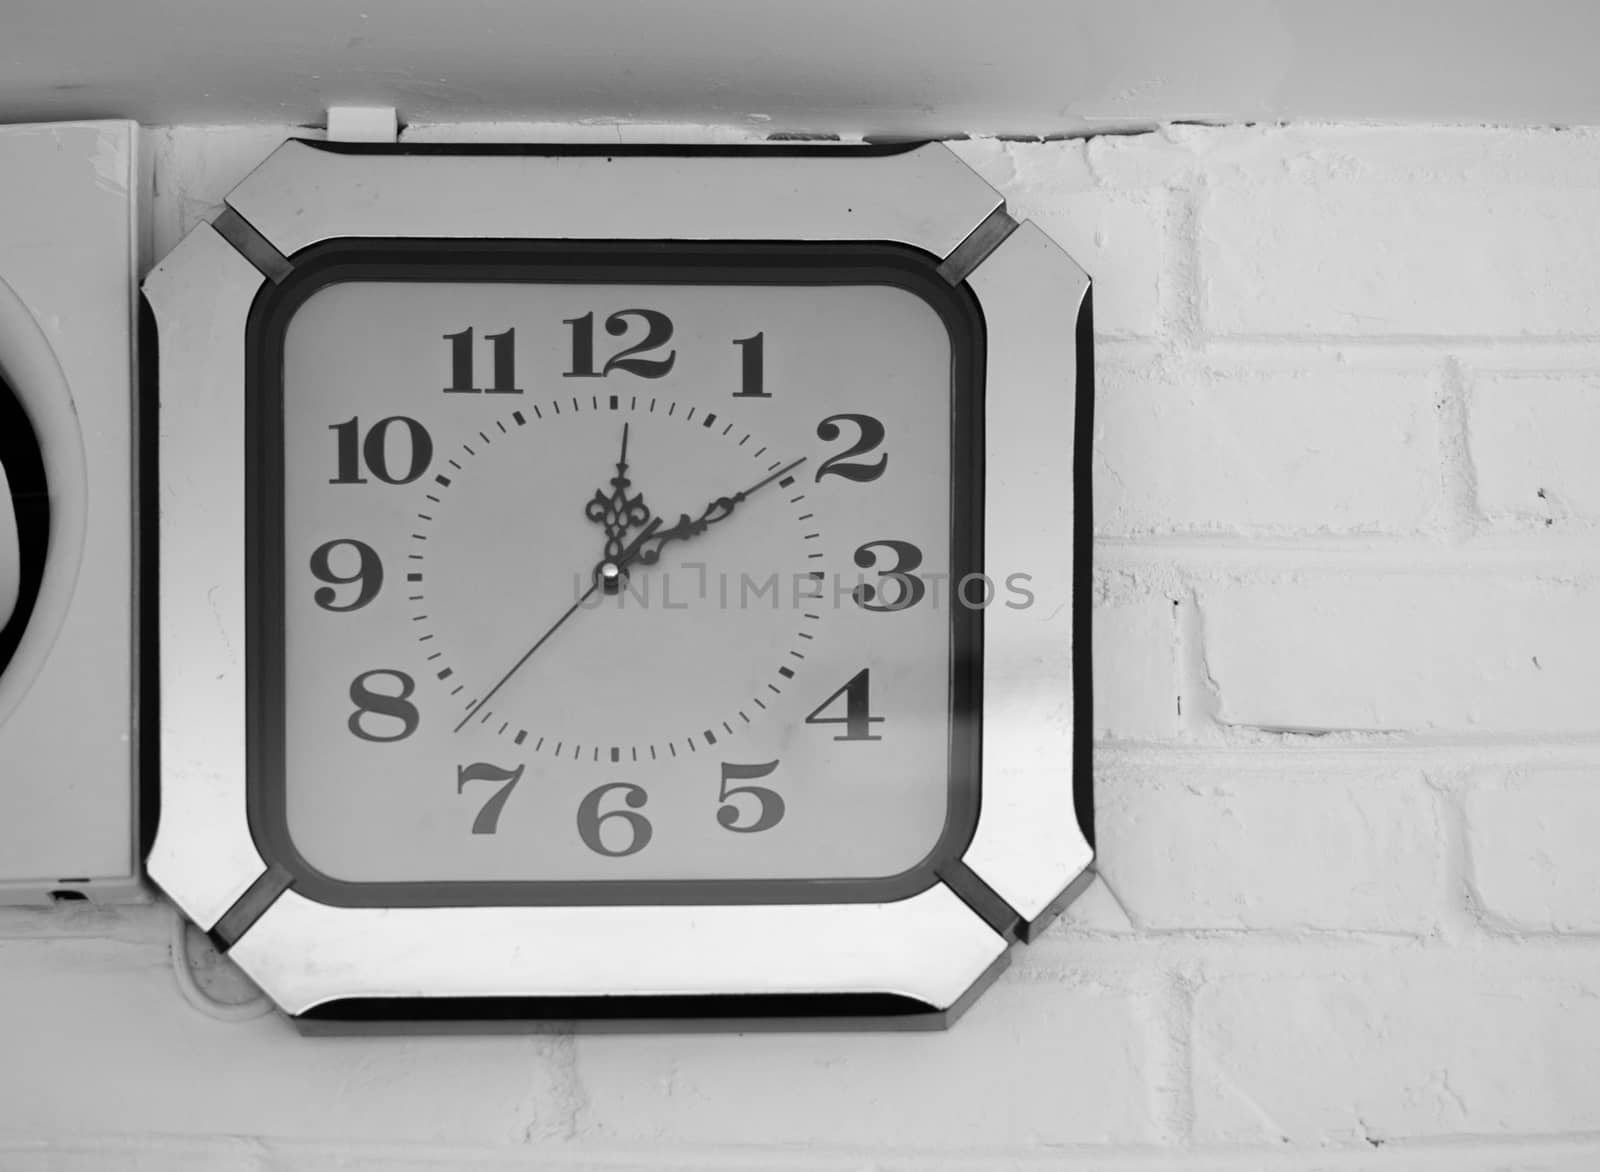 ANTIQUE CLOCK MOUNTED ON WALL by PrettyTG